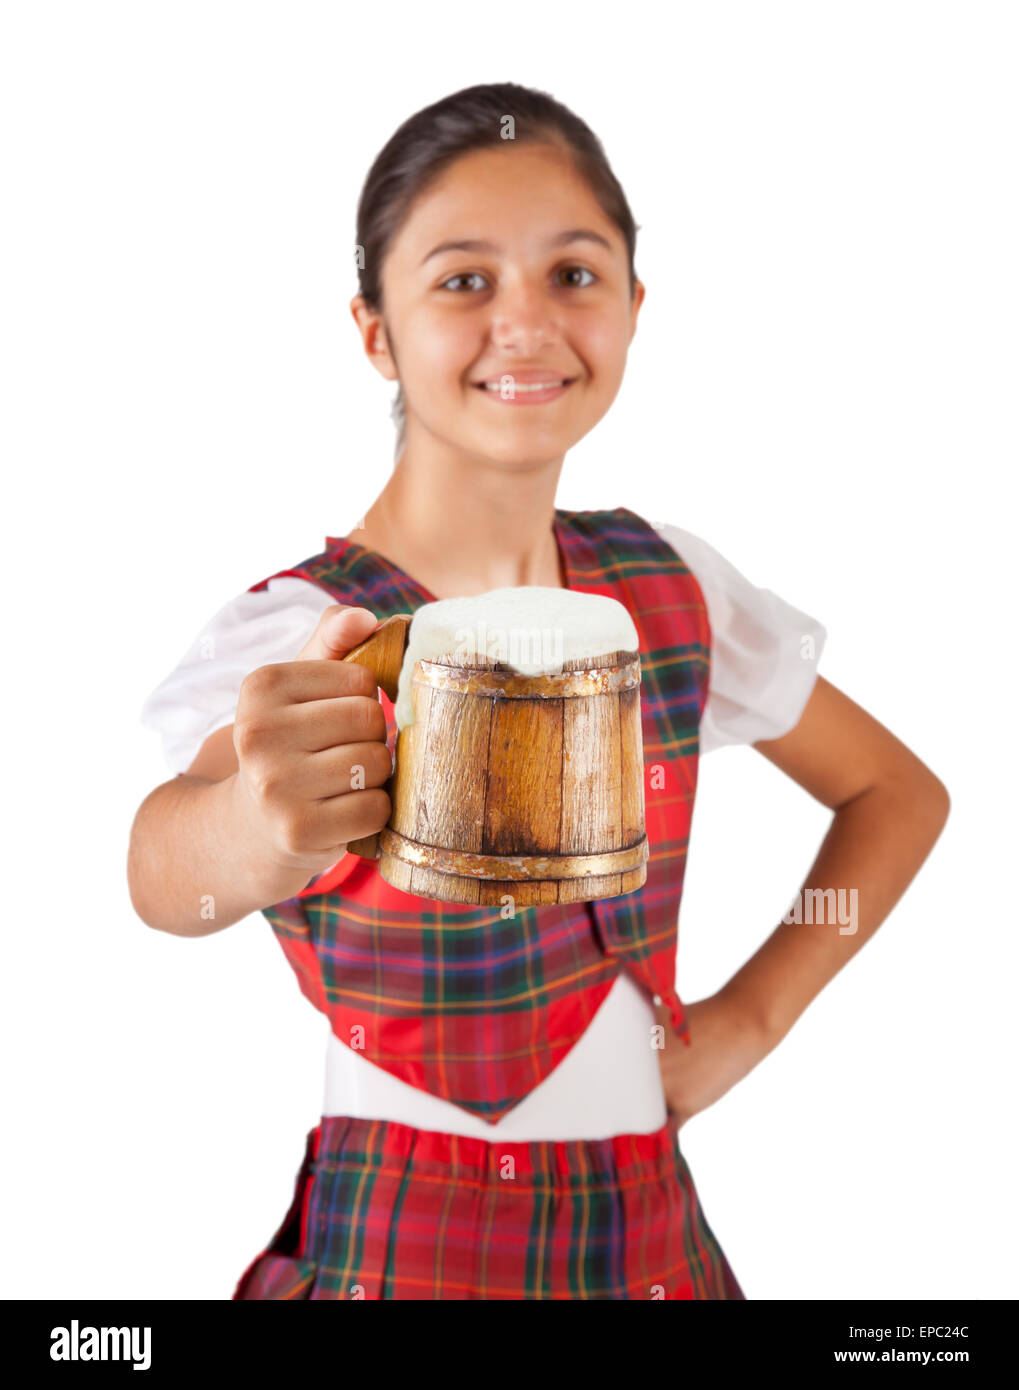 Teenager dressed with red plaid clothing and mug of beer on white background. Stock Photo